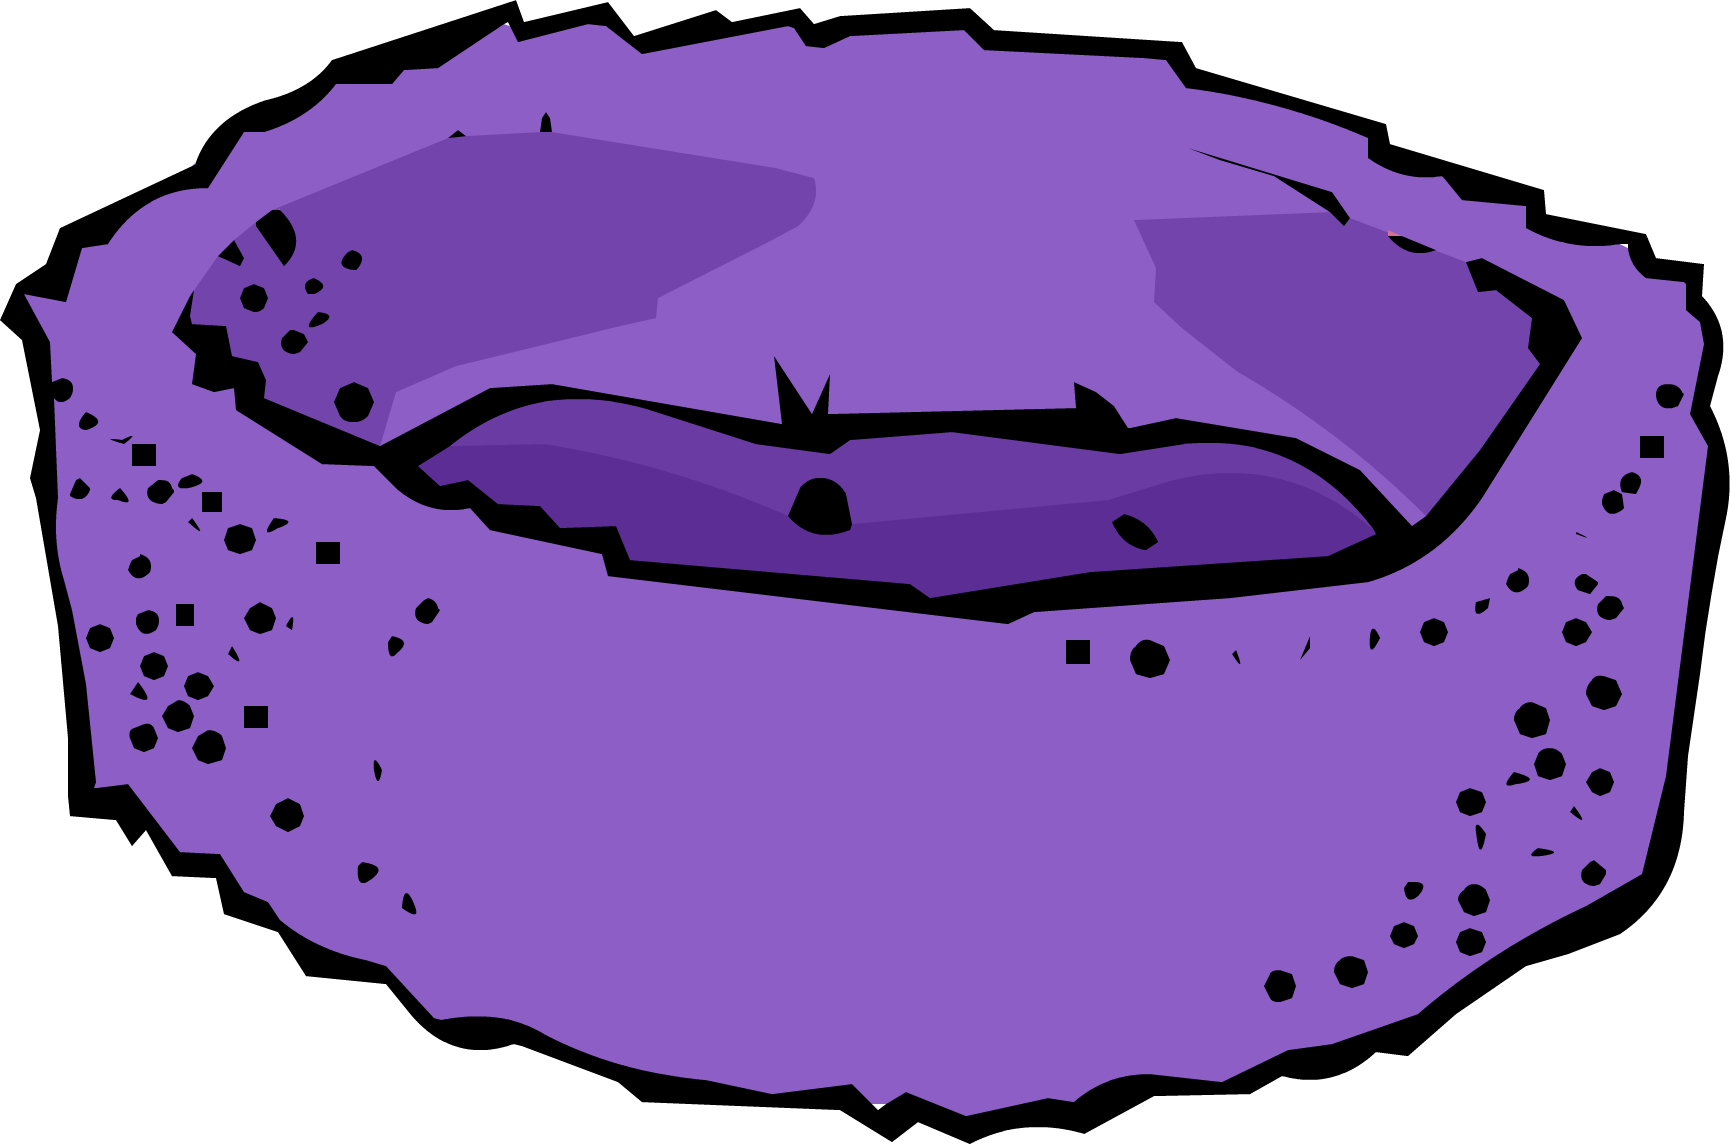 clipart bed purple bed